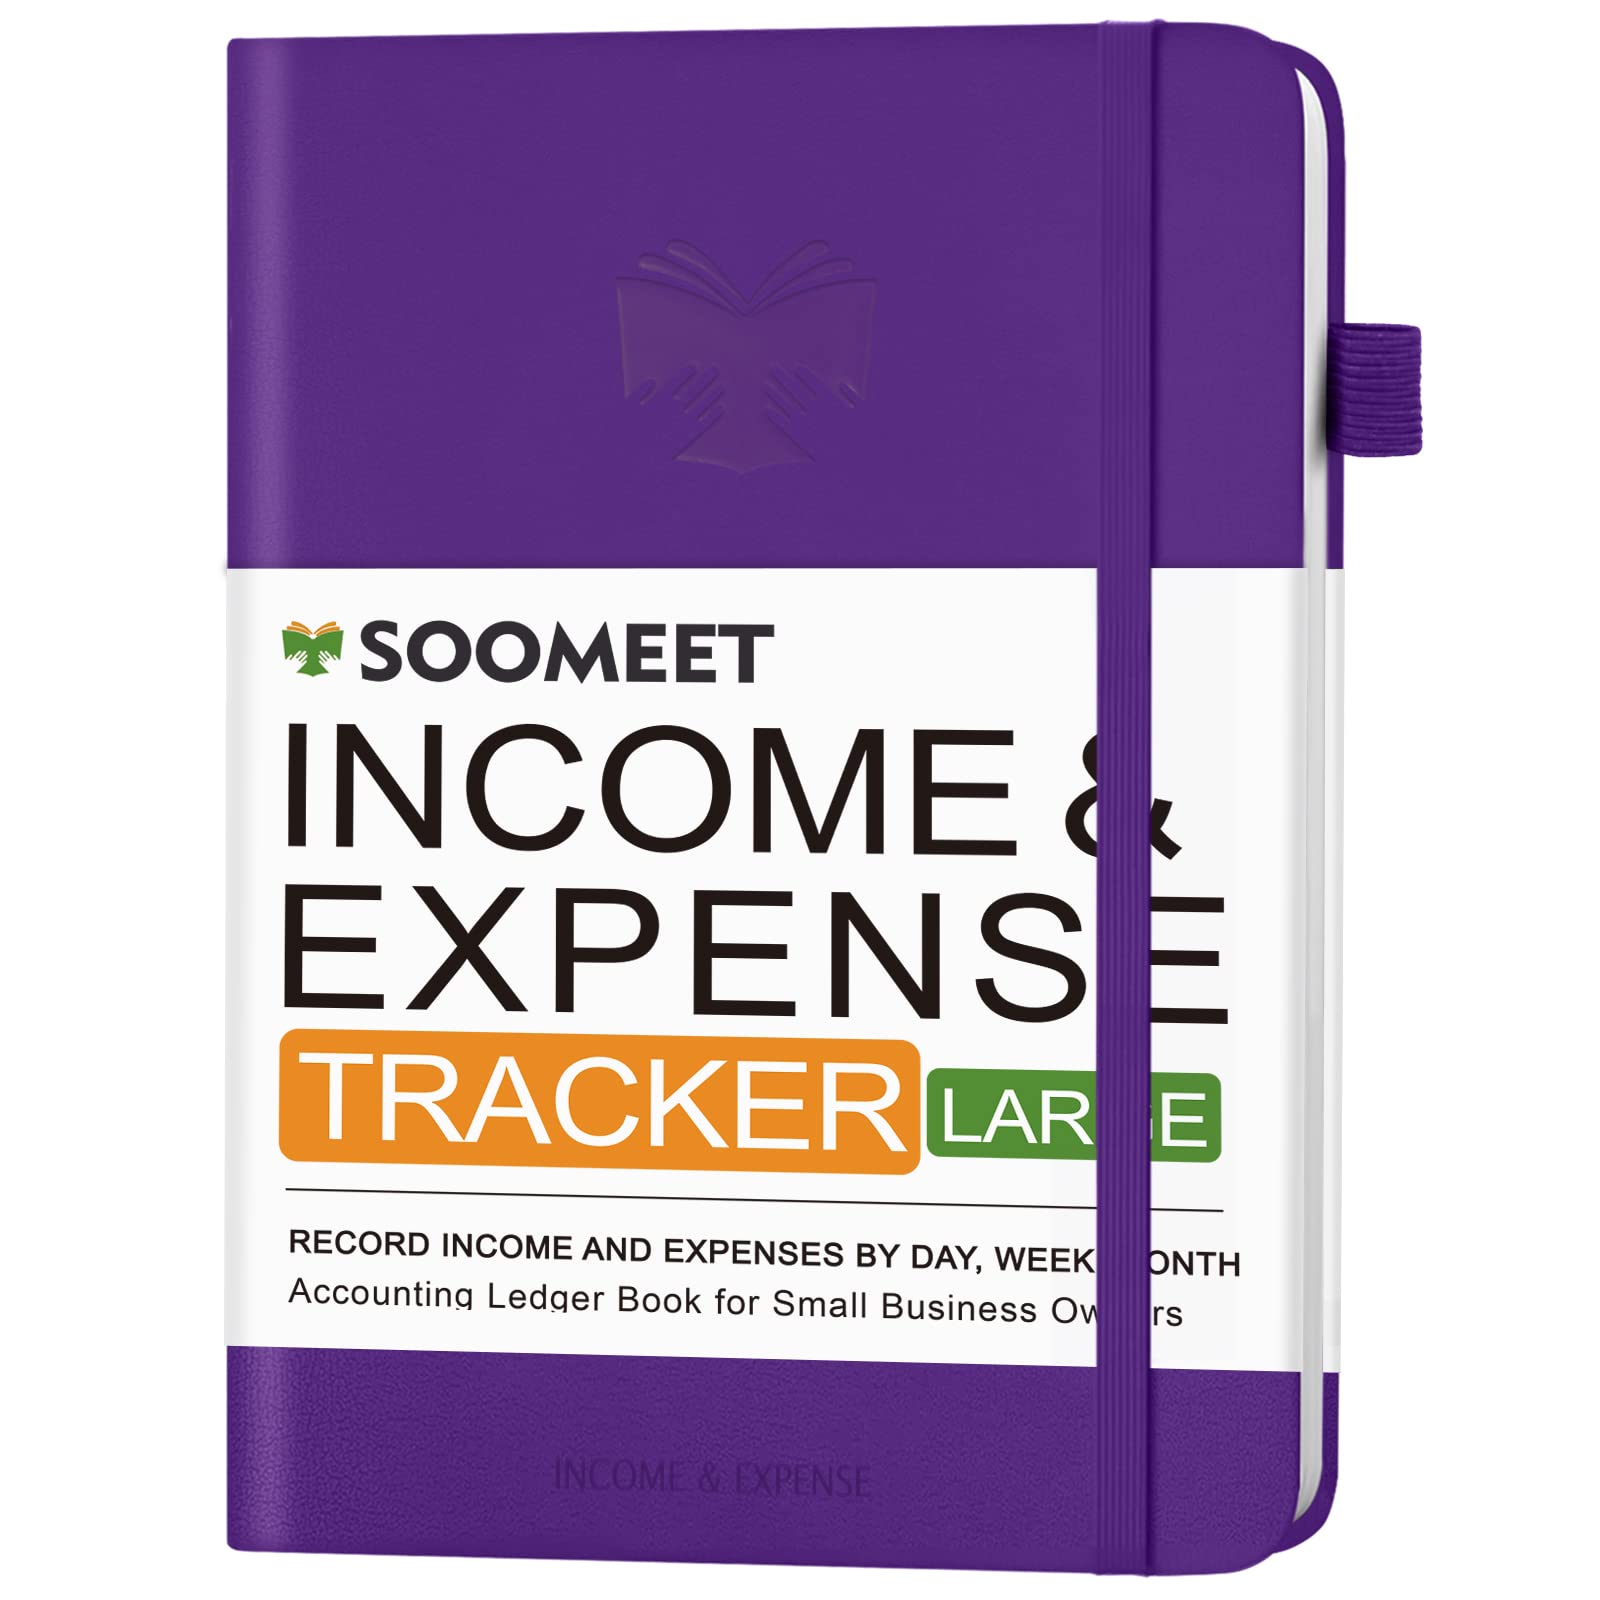 Soomeet Income and Expense TrackerLog BookSmall Business Ledger BookAccounting Bookkeeping Ledger Log Bookr Large 7